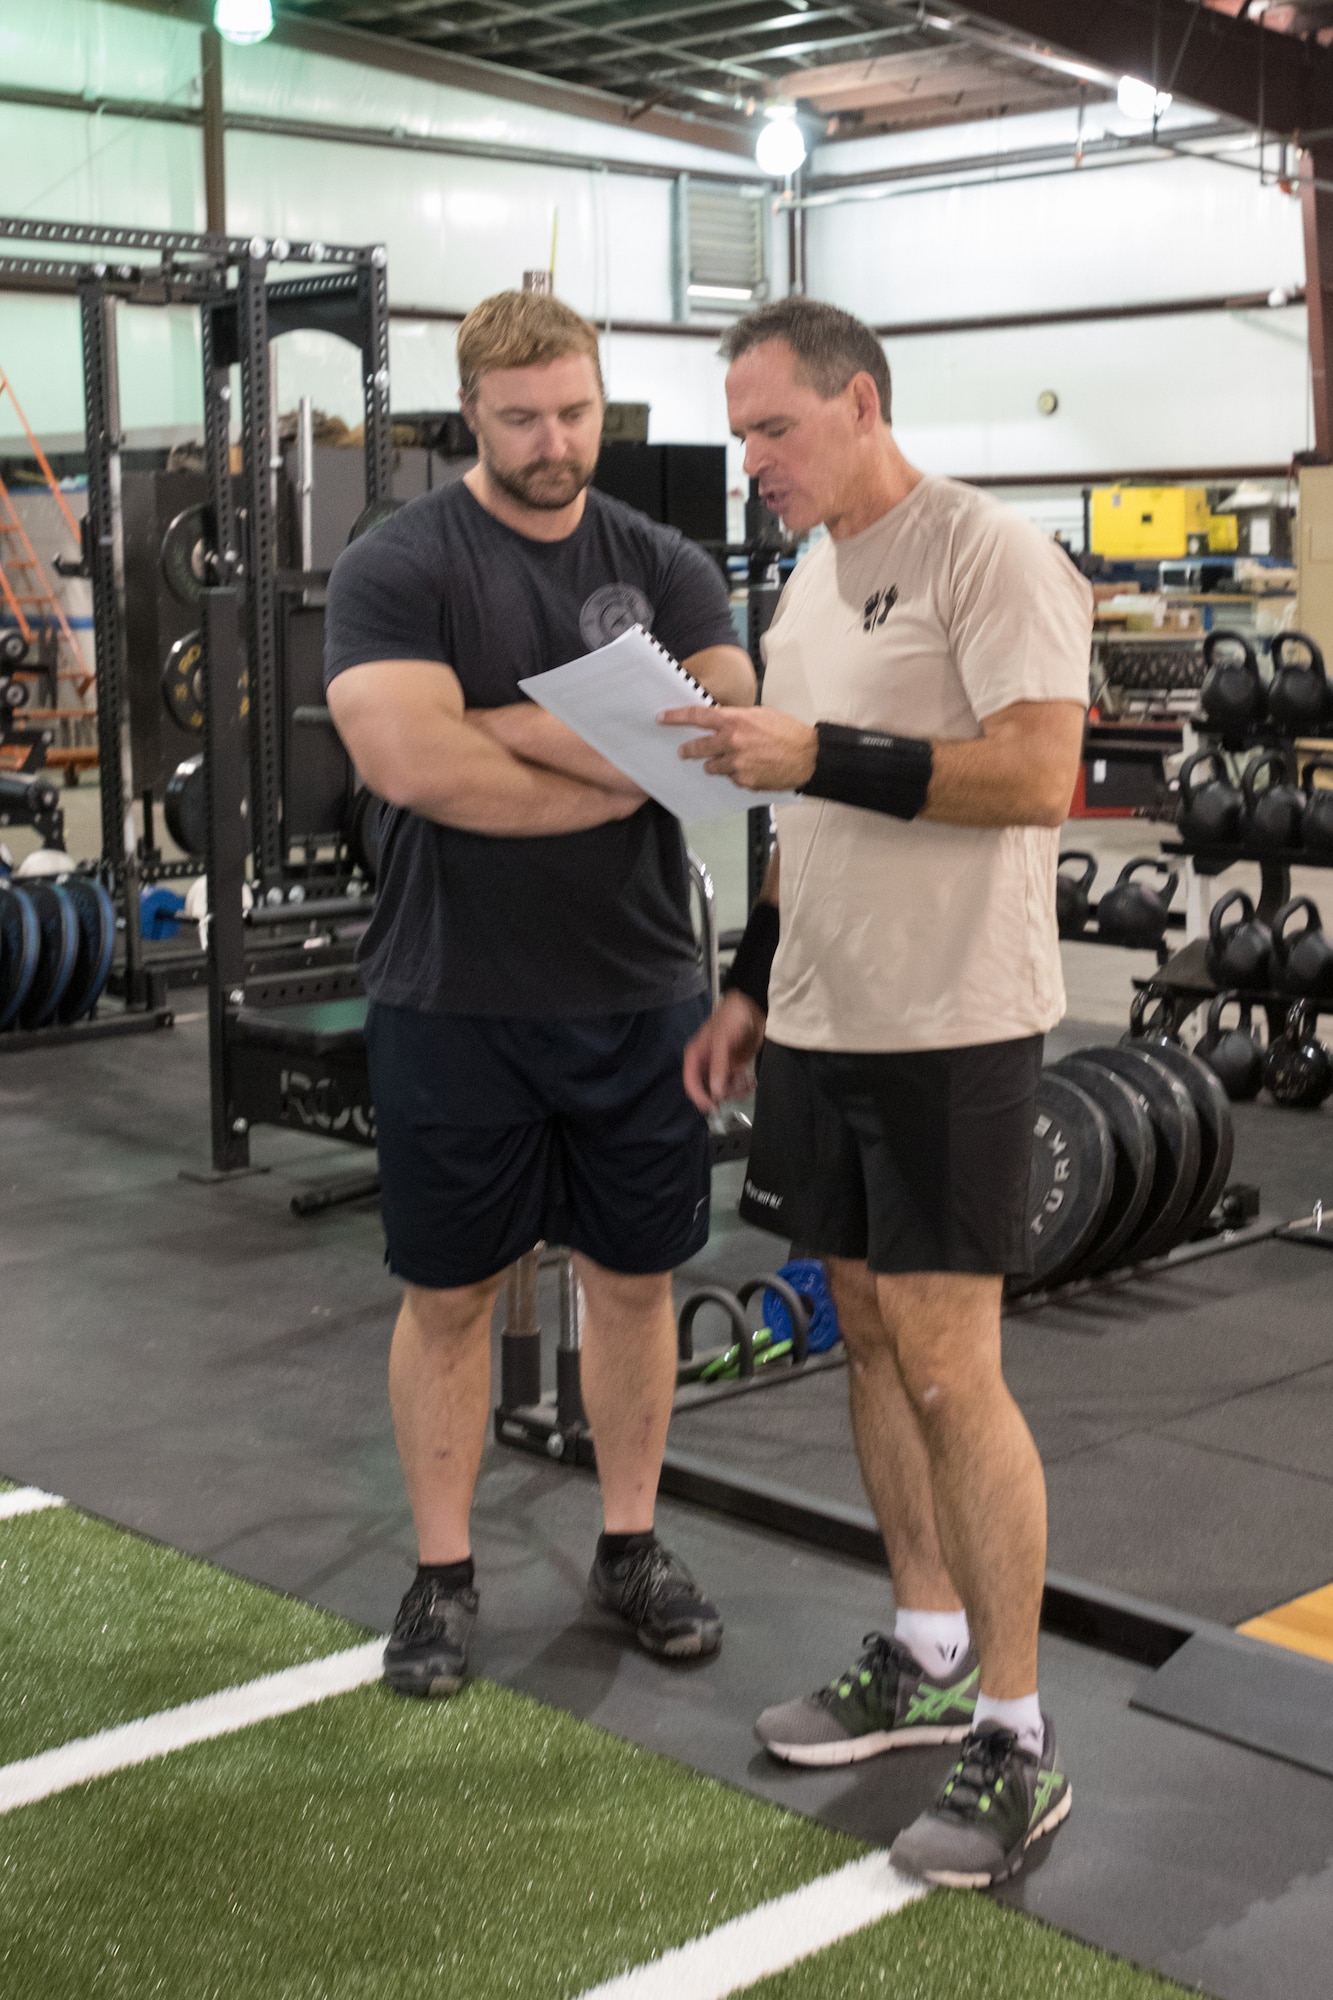 Lt. Col. Sean McLane, commander of the 123rd Special Tactics Squadron, looks over his personal workout and rehabilitation regimen during a session at the Human Performance Program facility on the Kentucky Air National Guard Base in Louisville, Ky., Oct. 14, 2016. Evaluating his progress is Will Lawson, the program’s lead athletic trainer and strength coach, who helped design McLane’s daily workout routine. (U.S. Air National Guard photo by Tech. Sgt. Vicky Spesard)
